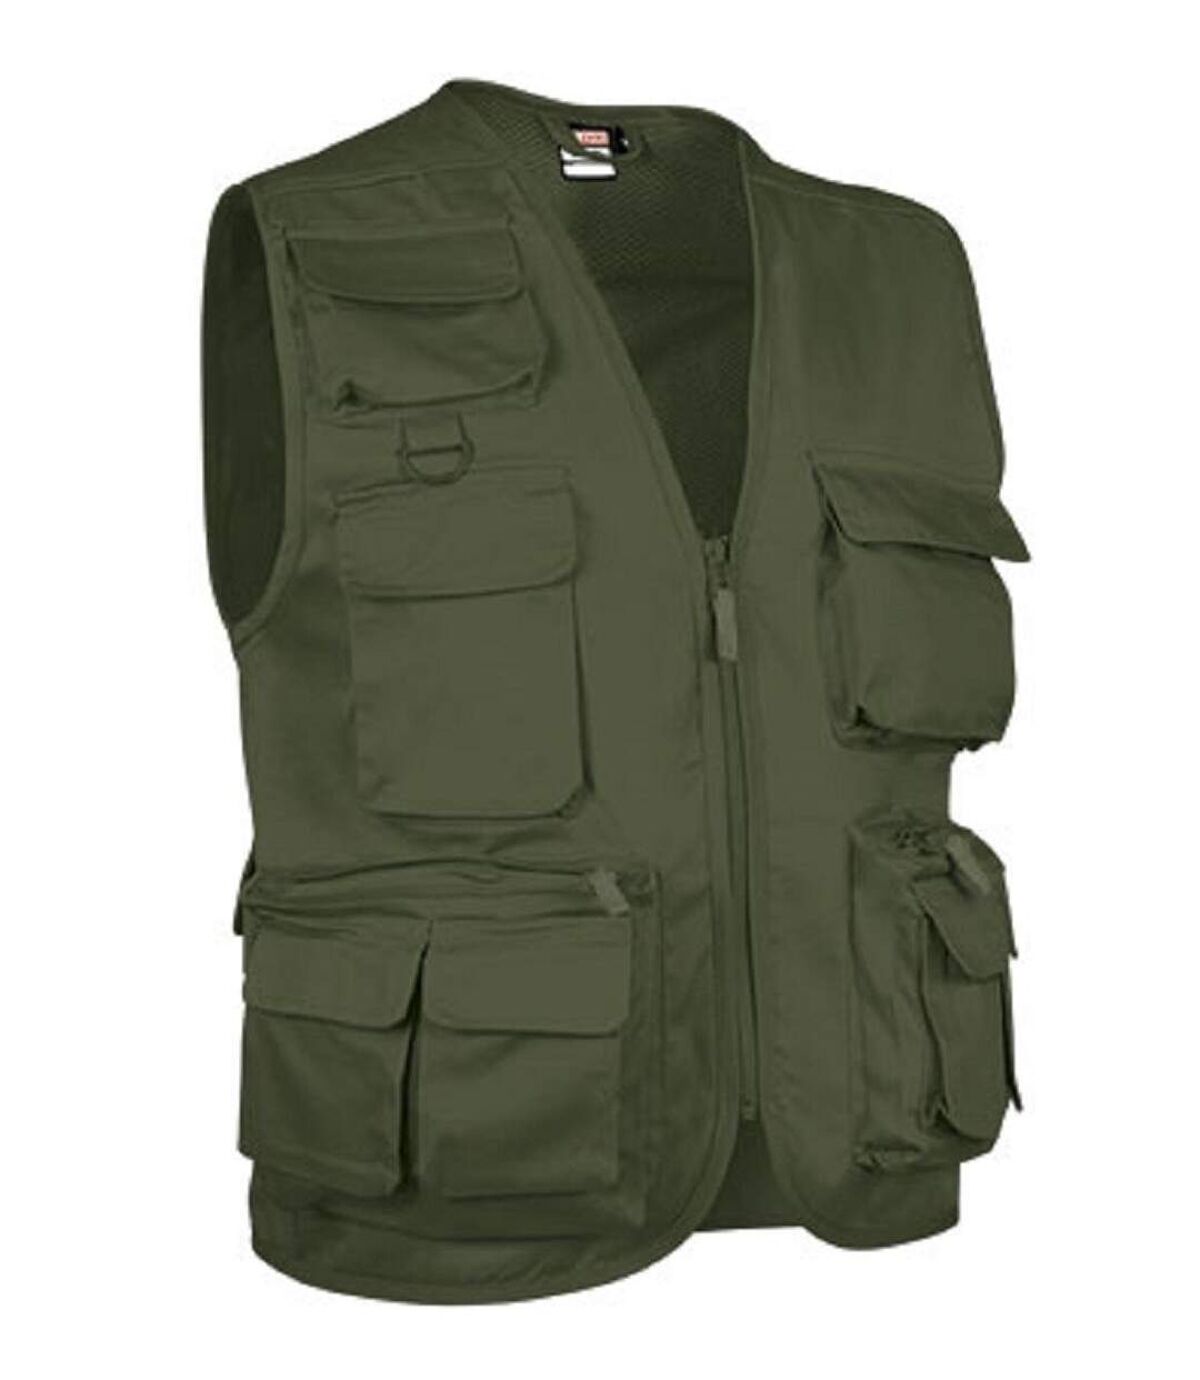 Gilet reporter multipoches sans manches - SAFARI vert olive militaire